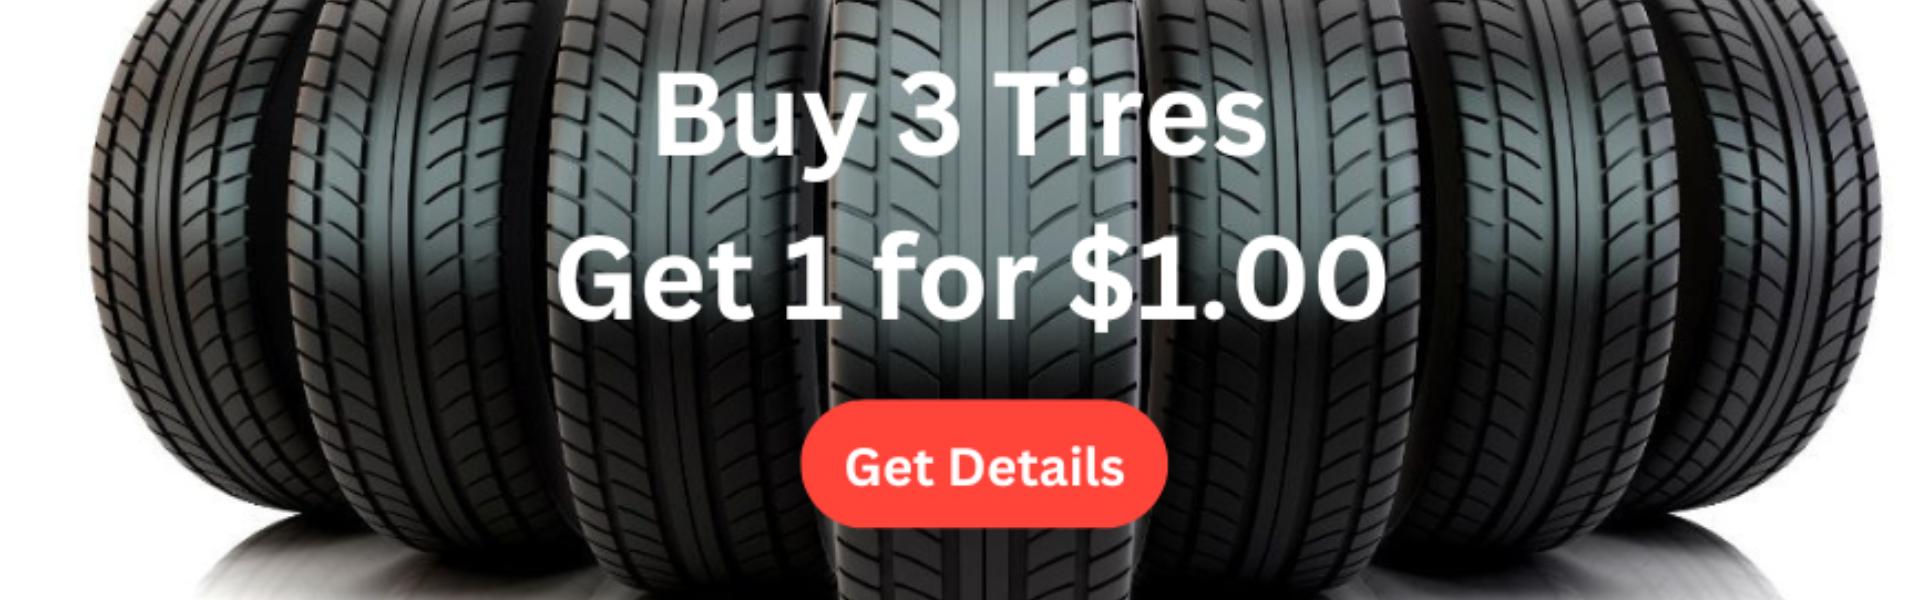 Buy 3 Tires Get 1 for $1.00